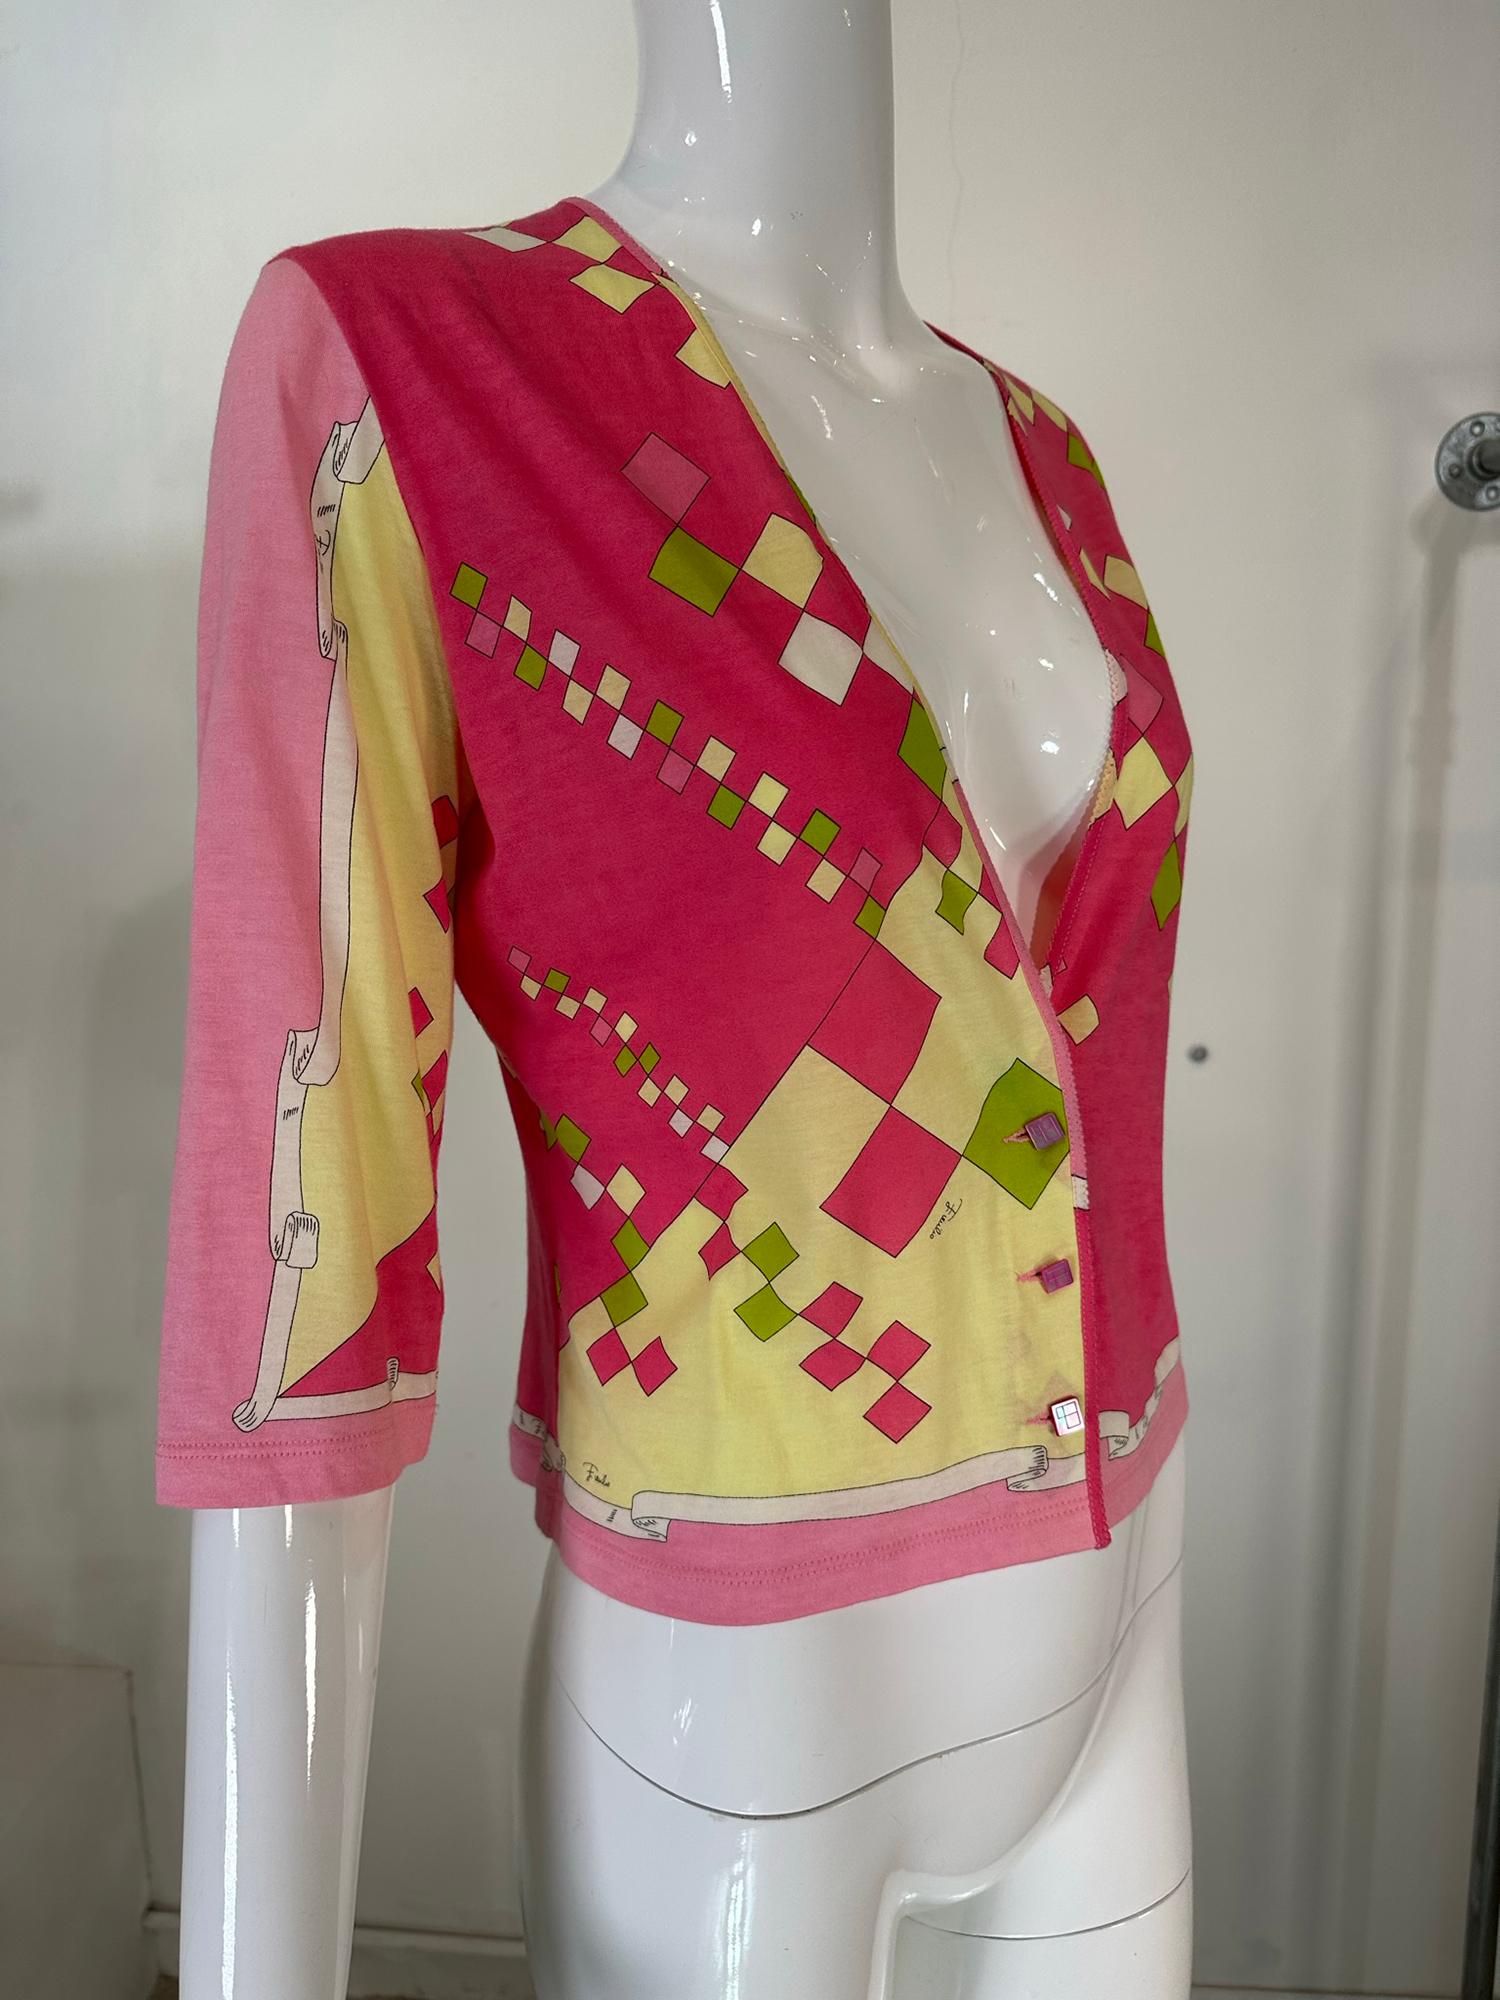 Emilio Pucci fine cotton & silk knit, V neck button front cardigan sweater. Soft fine cotton & silk knit cardigan sweater, signed Emilio Pucci. Great bright print. Closes with square pink tinted mother of pearl etched buttons. 3/4 length sleeves.